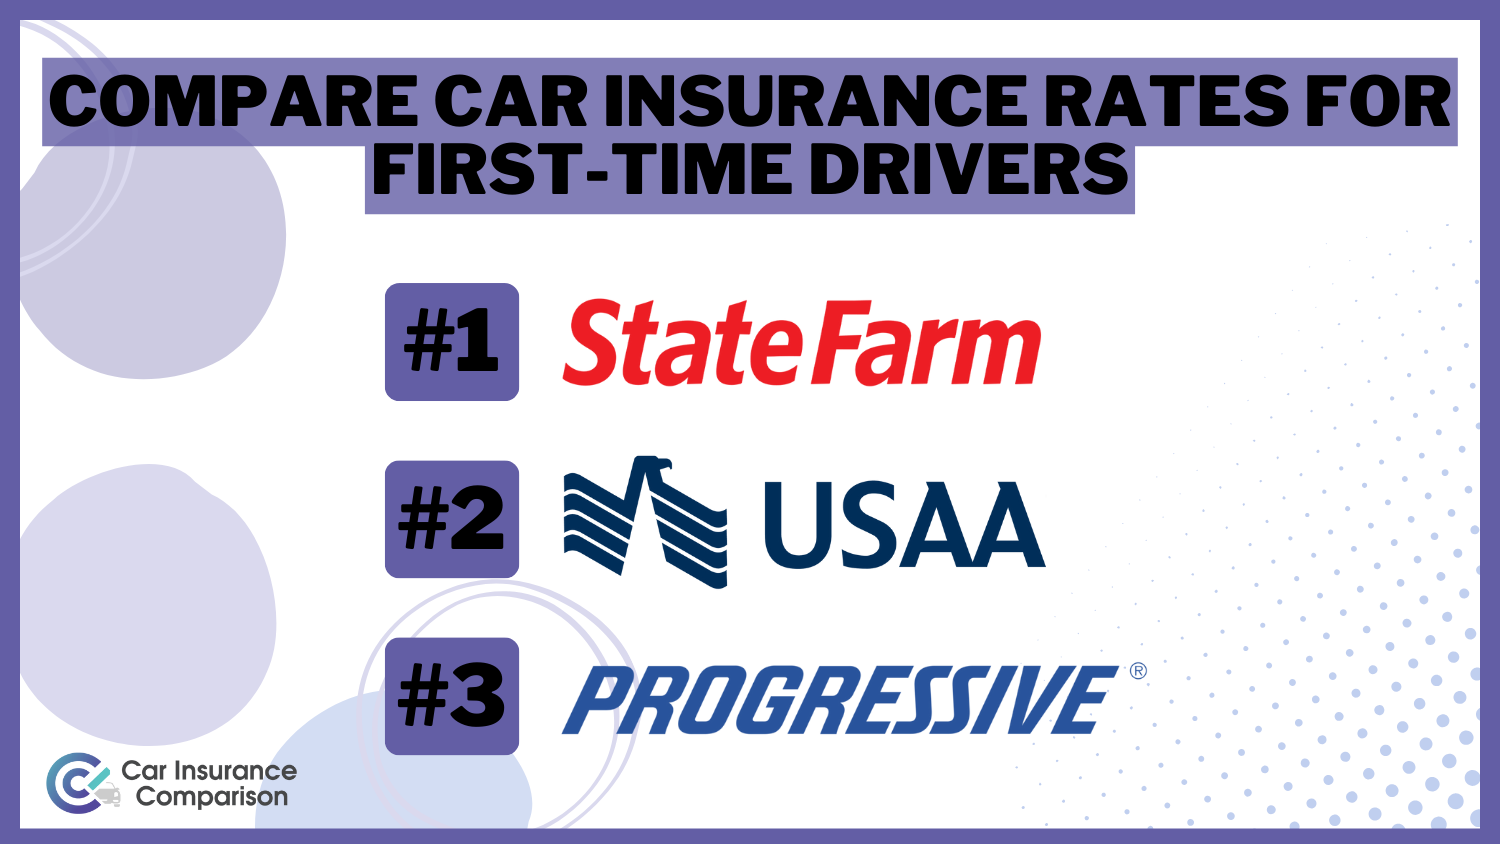 Compare Car Insurance Rates for First-time Drivers: State Farm, USAA and Progressive.